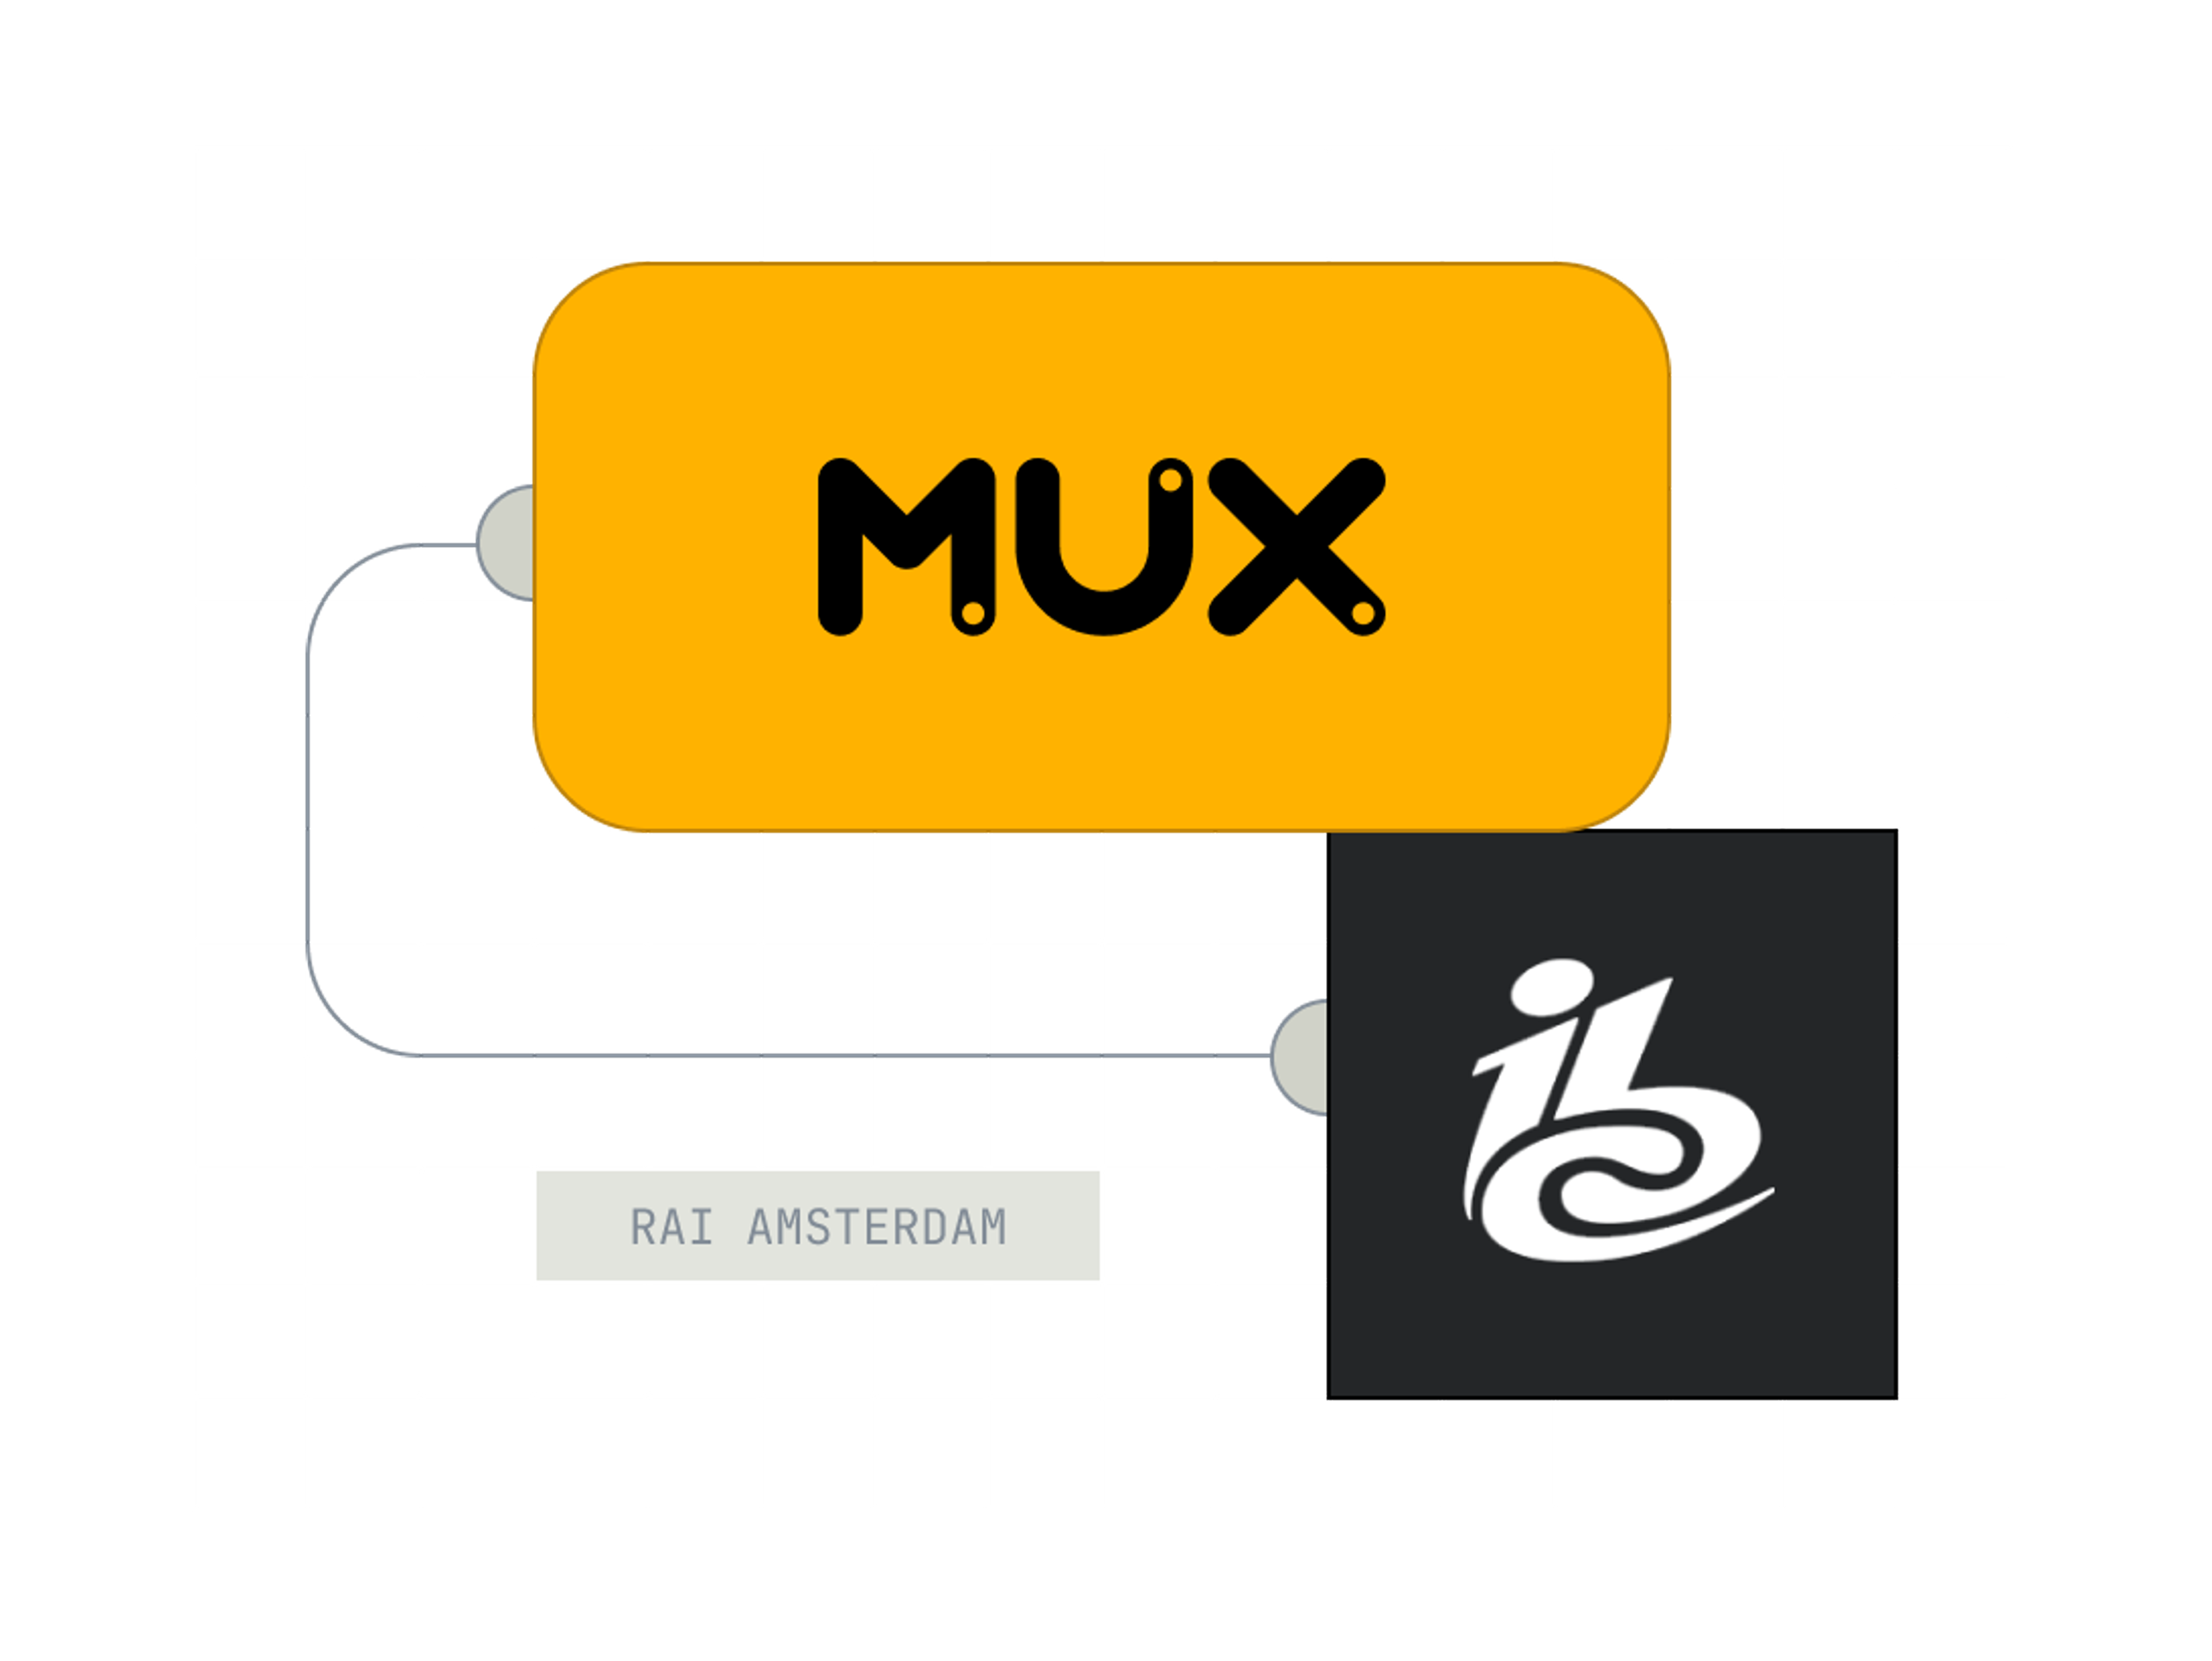 Mux logo on a yellow background connected to IBC's logo on a black background with a line. Grid in the background with a box to the left of the IBC logo that reads "RAI Amsterdam".